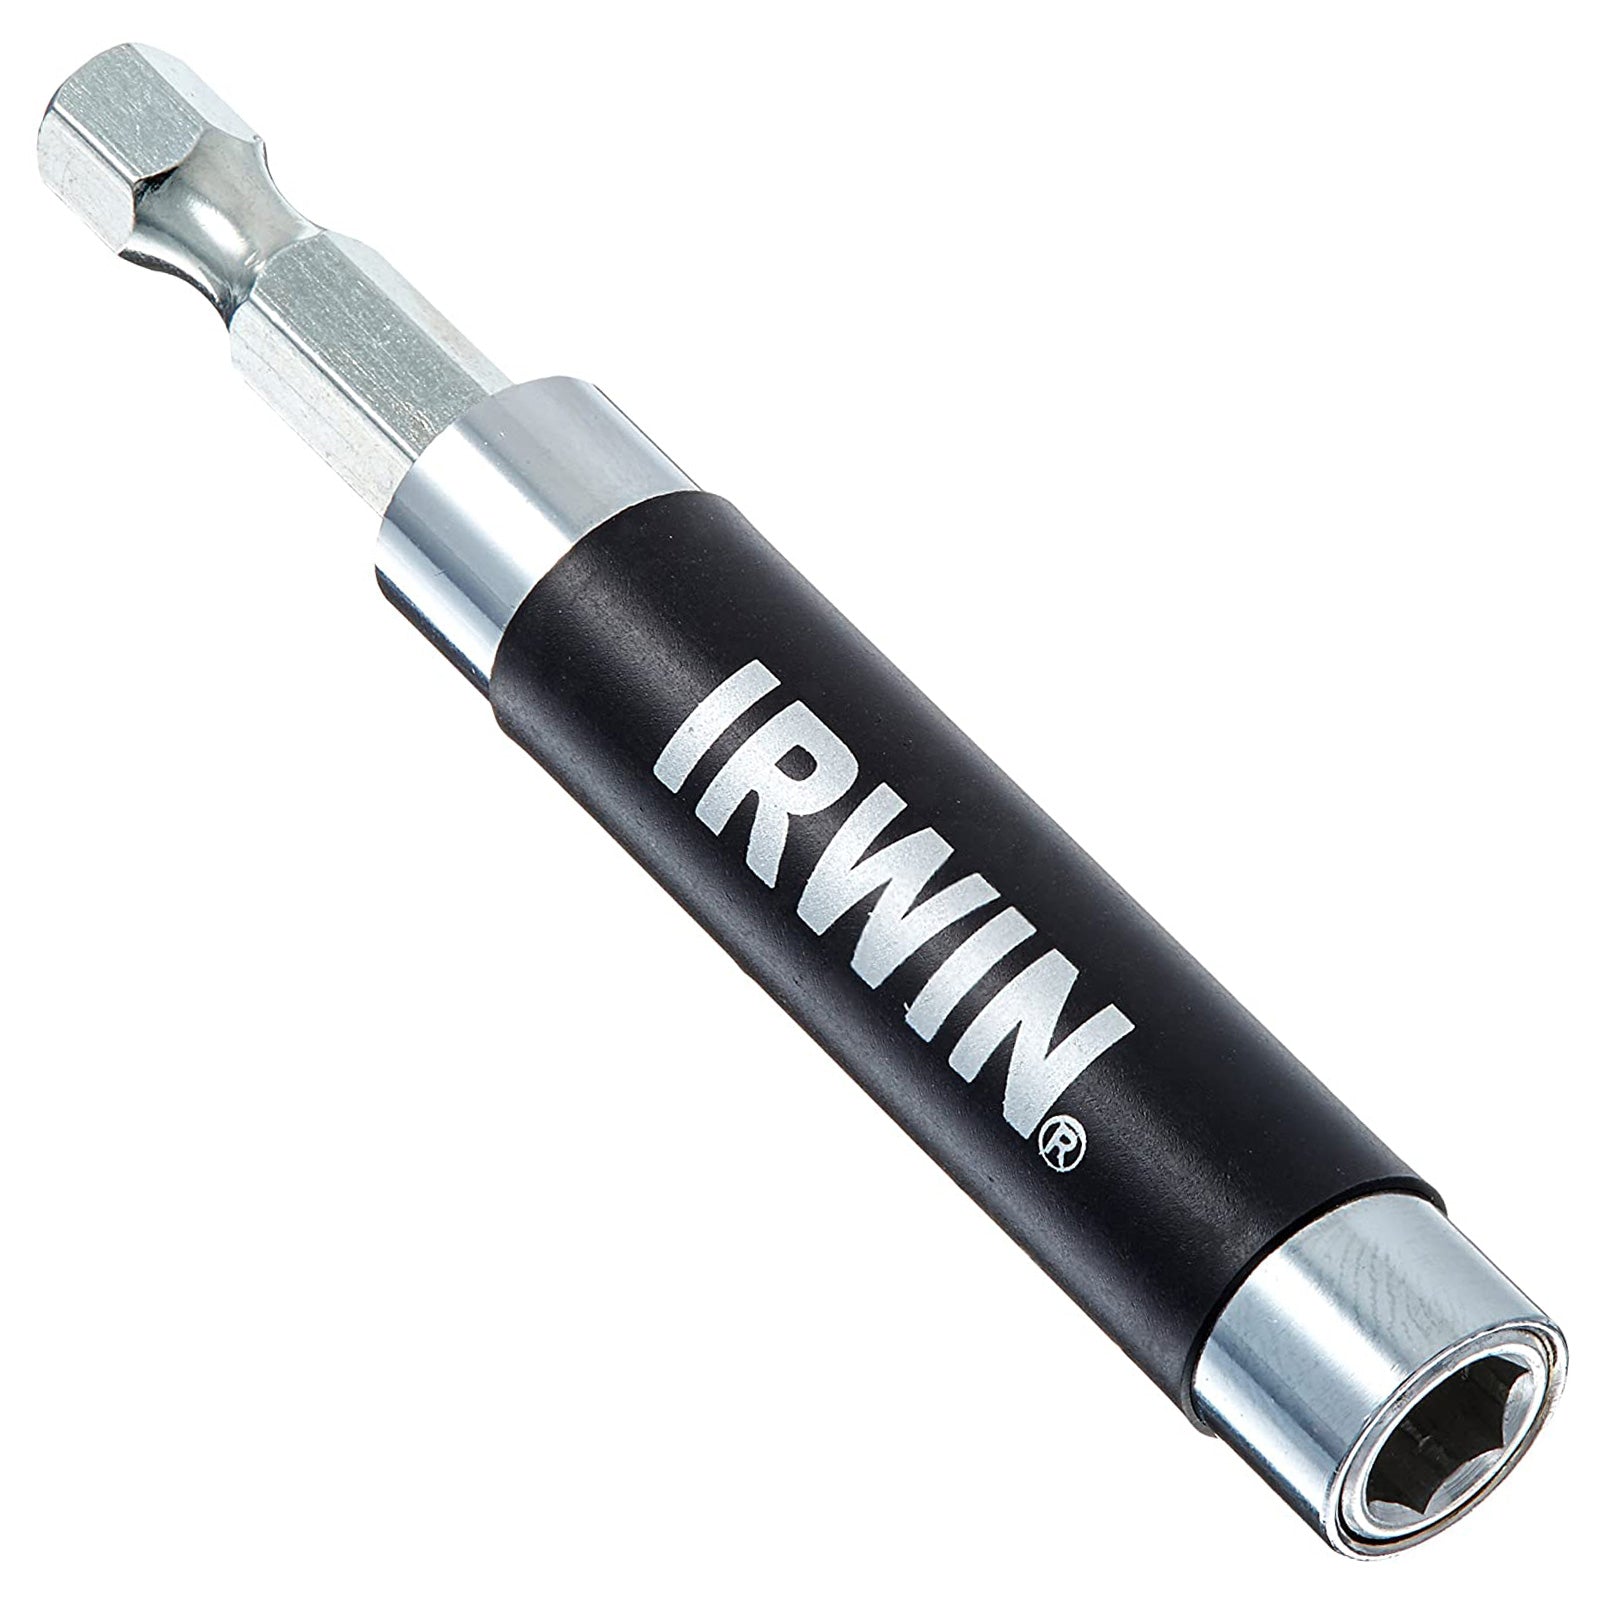 IRWIN Magnetic Drive Guide